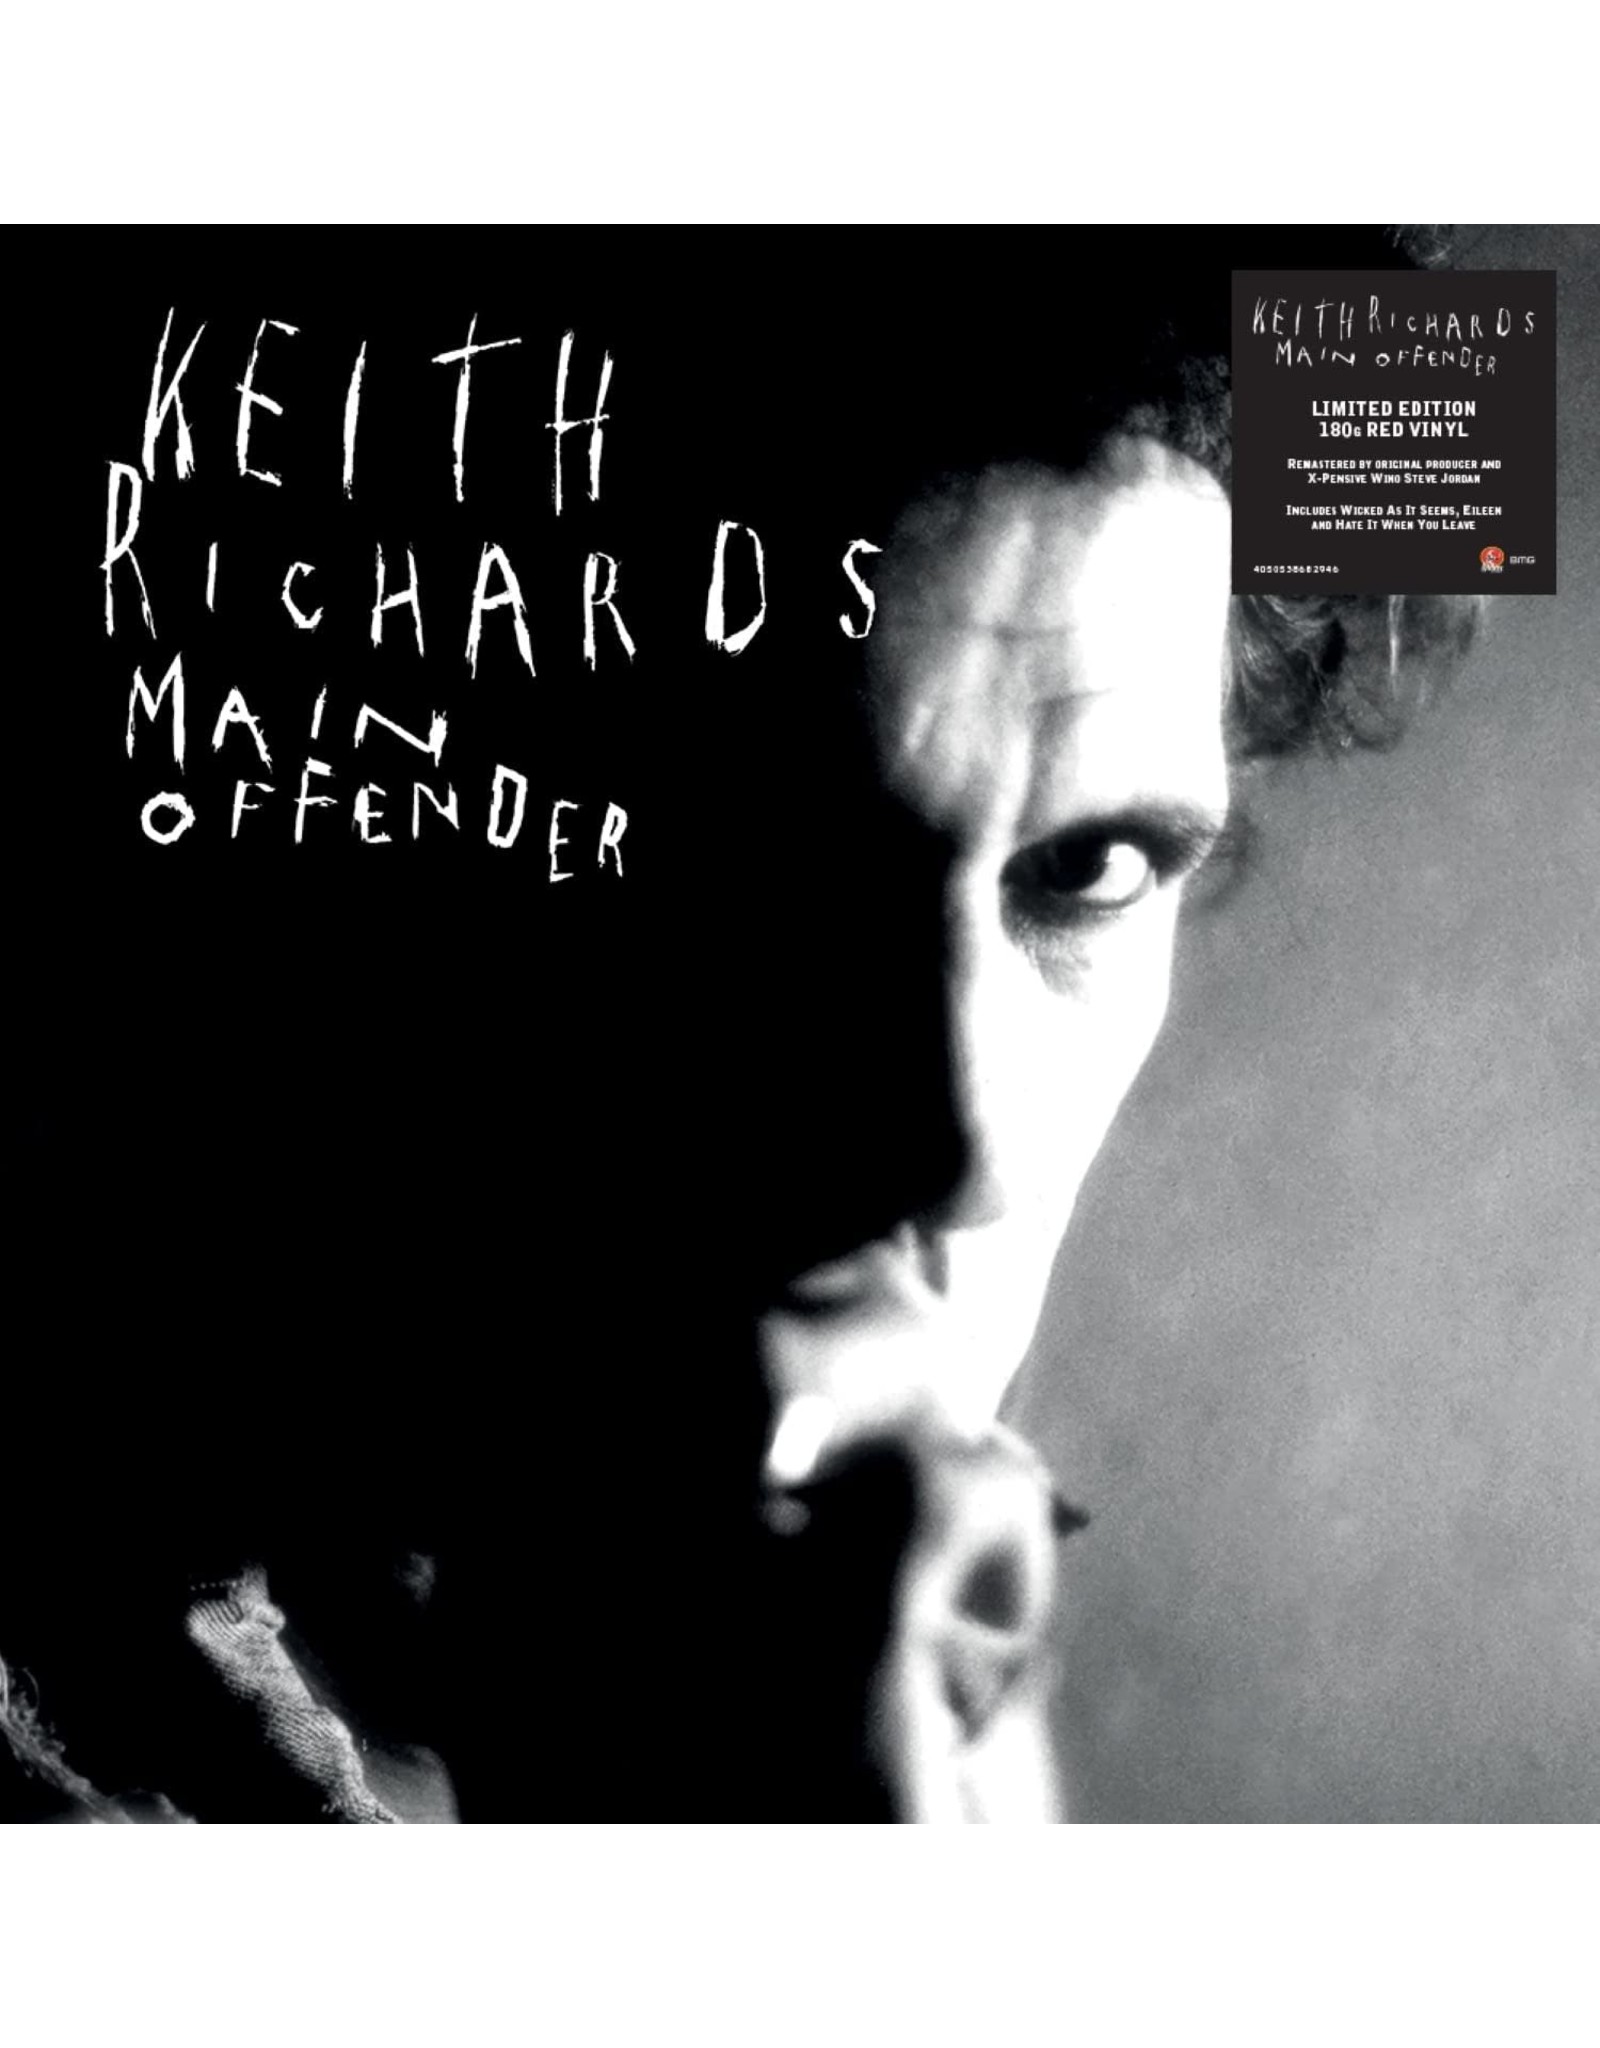 Keith Richards - Main Offender (Red Vinyl)